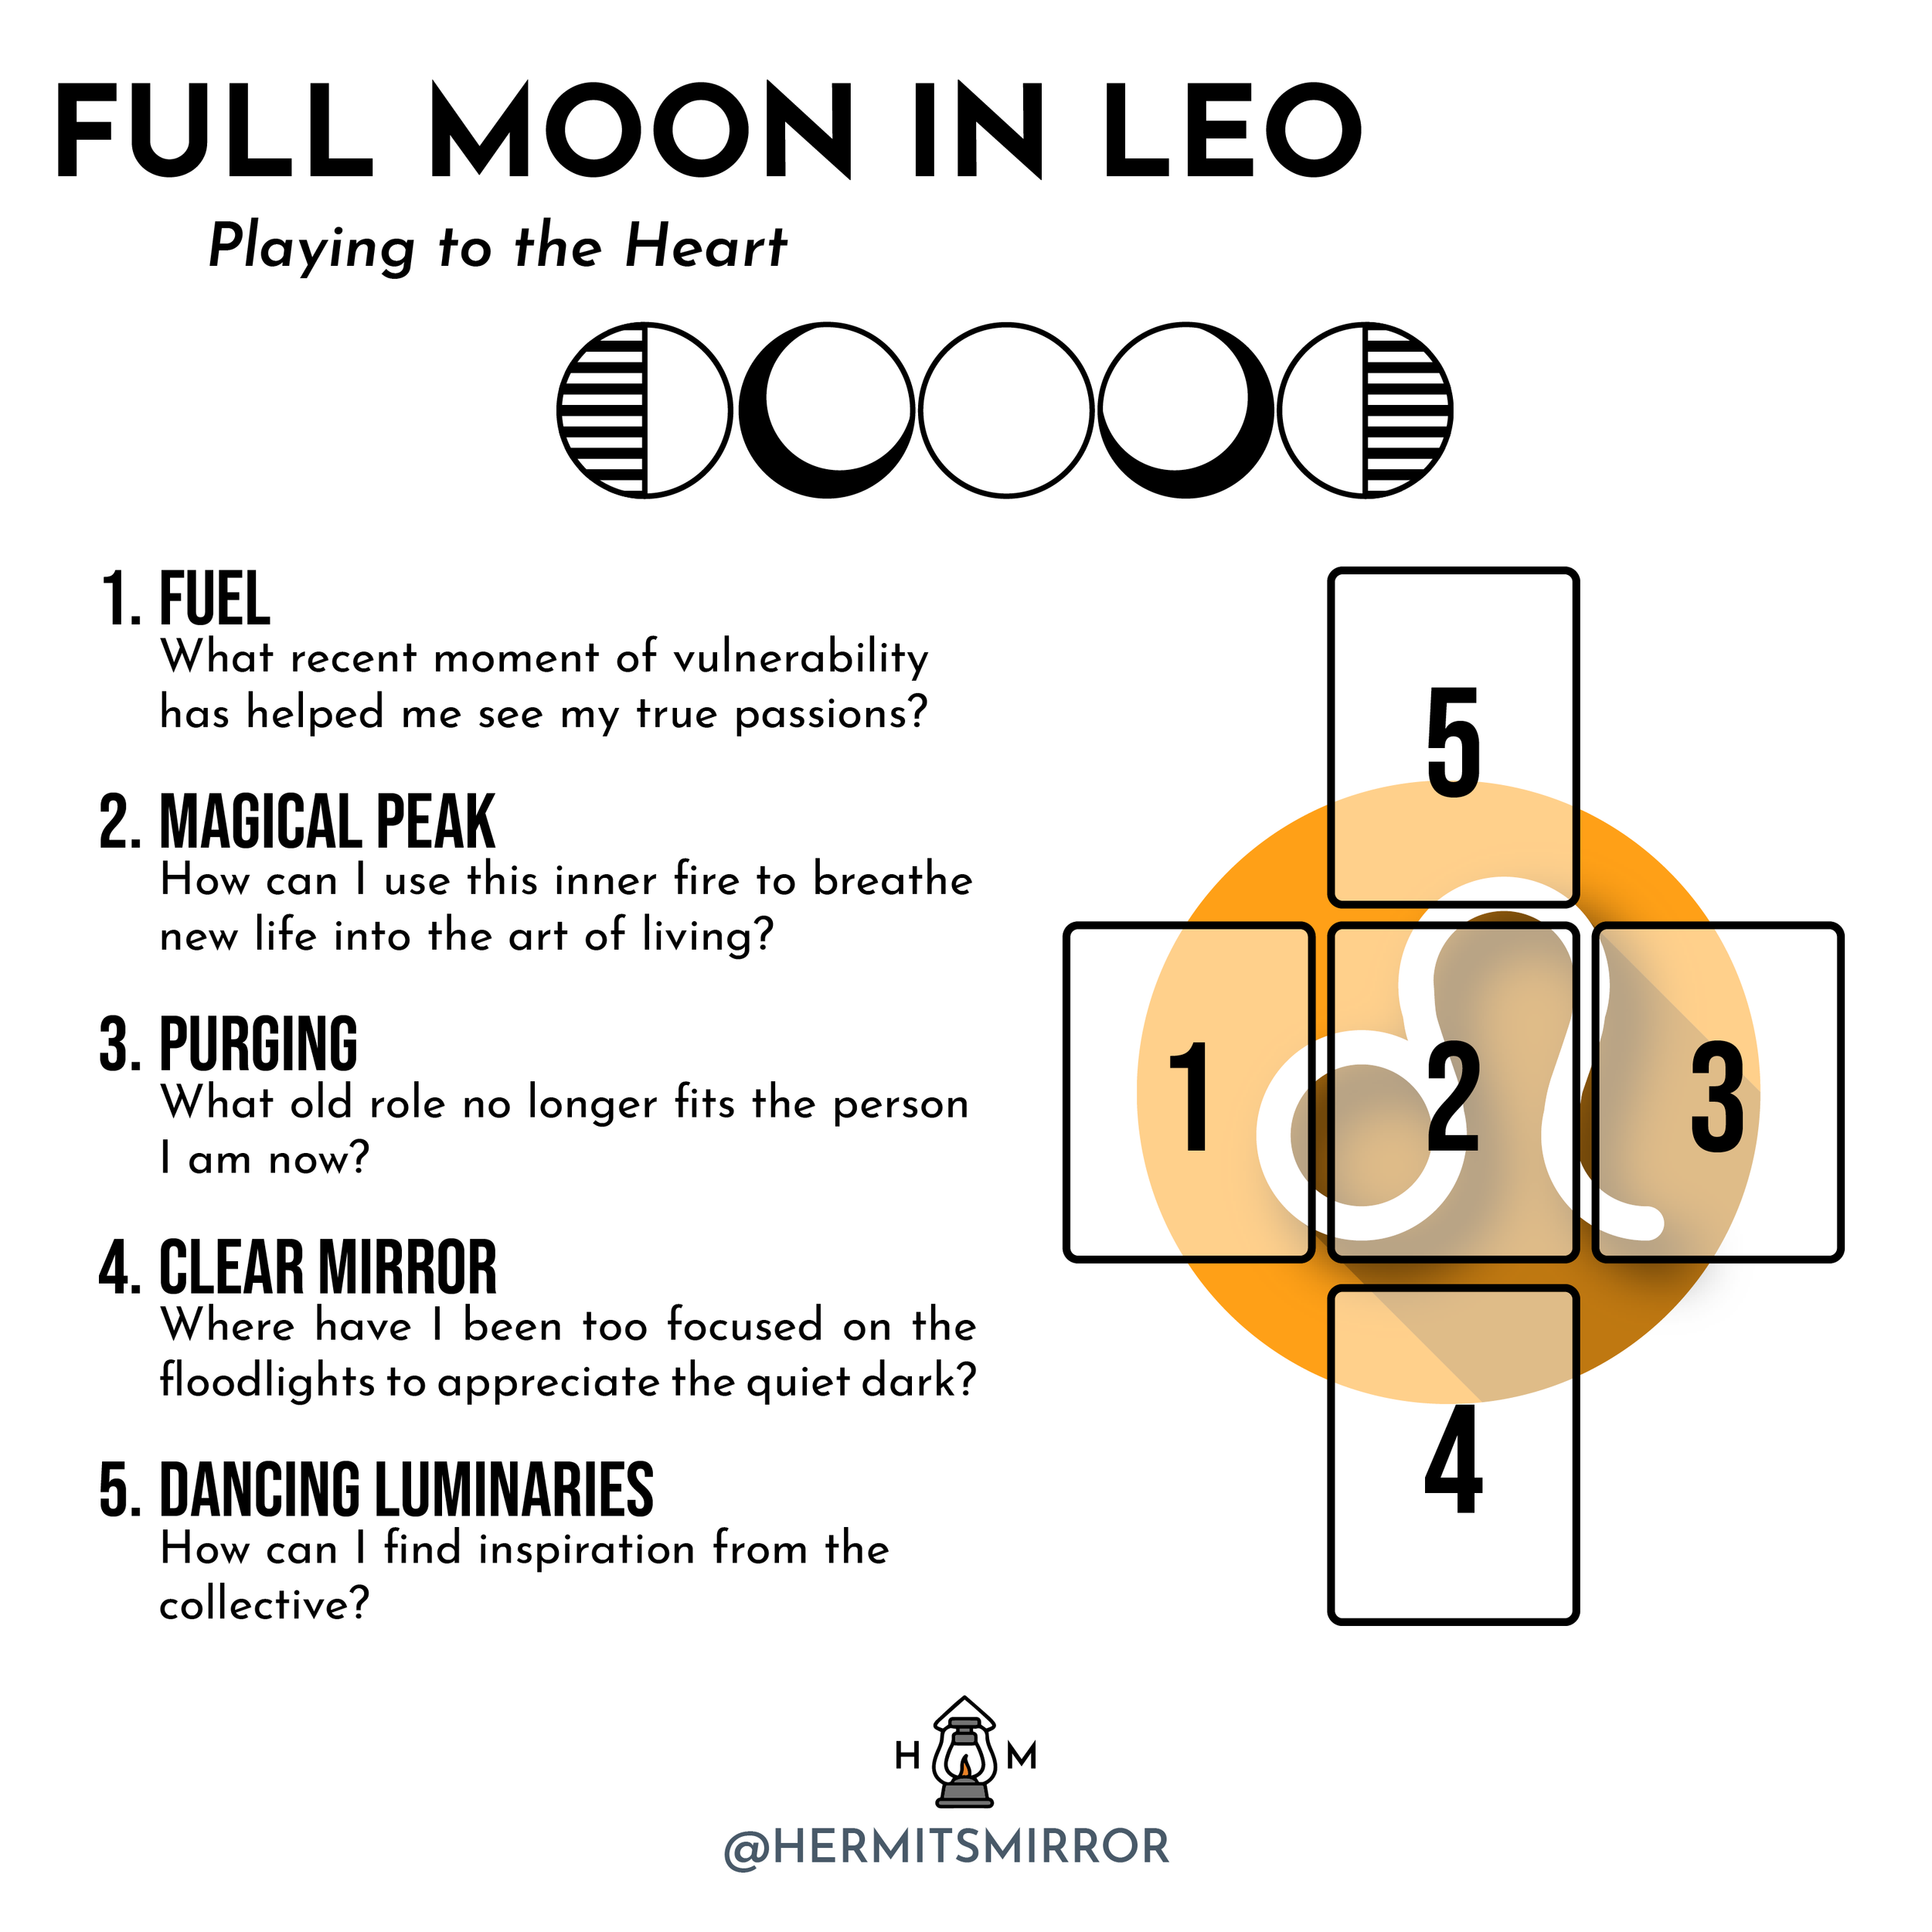 Now You Can Have Your Moon Reading Done Safely